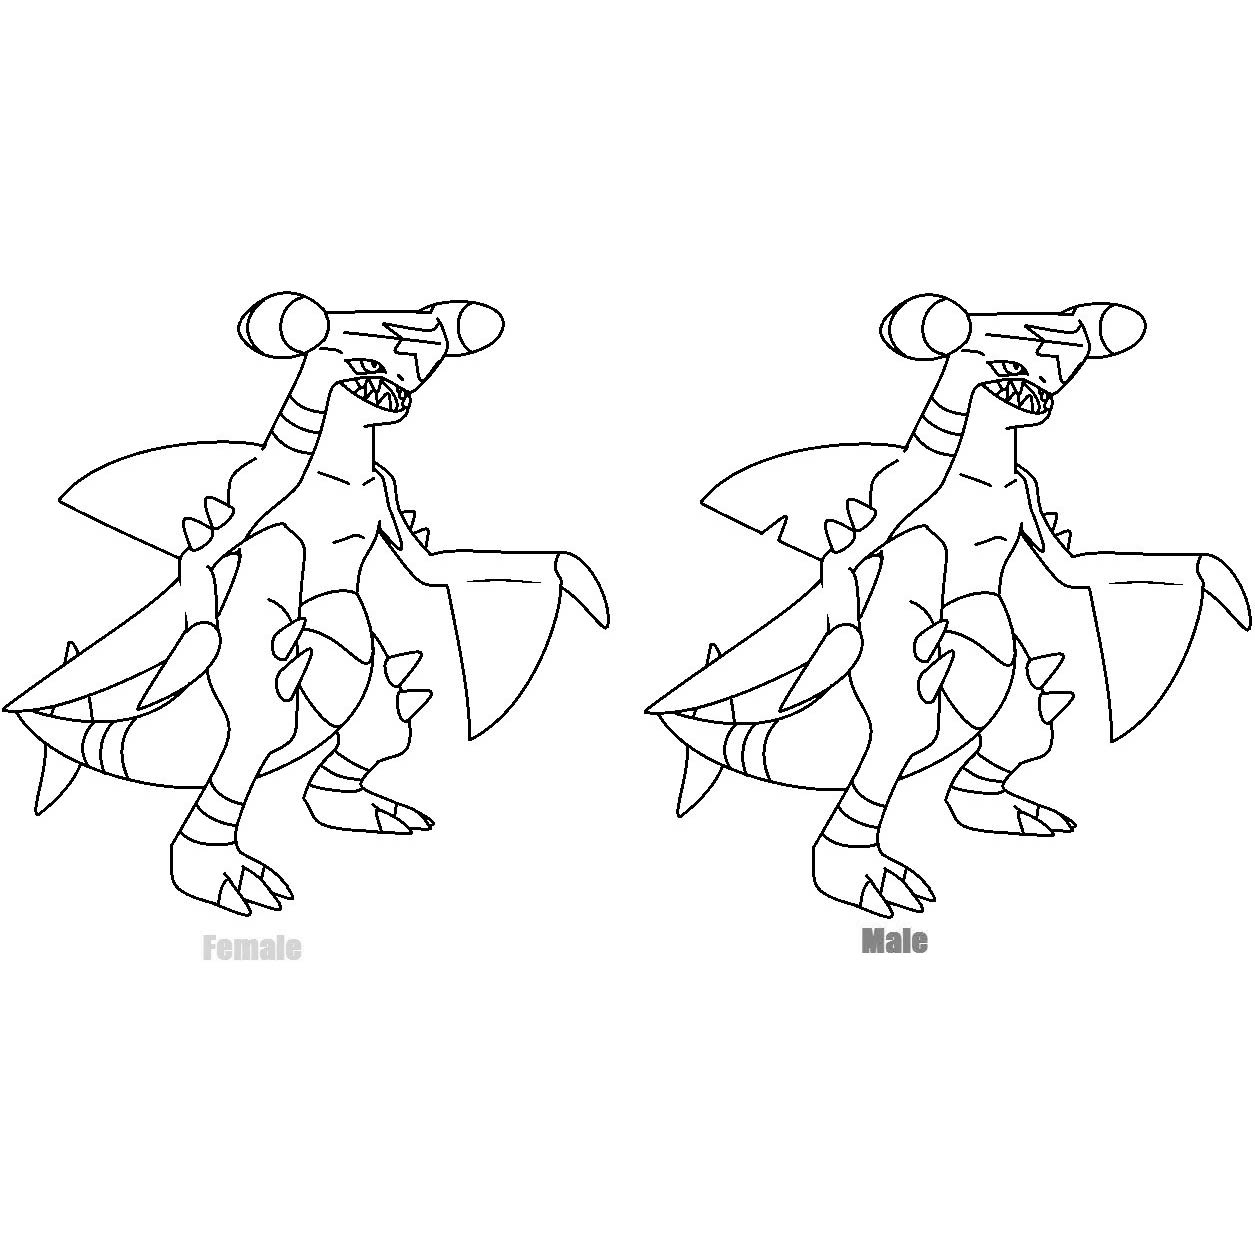 Free Garchomp Coloring Pages Lines by MotherGarchomp622 printable